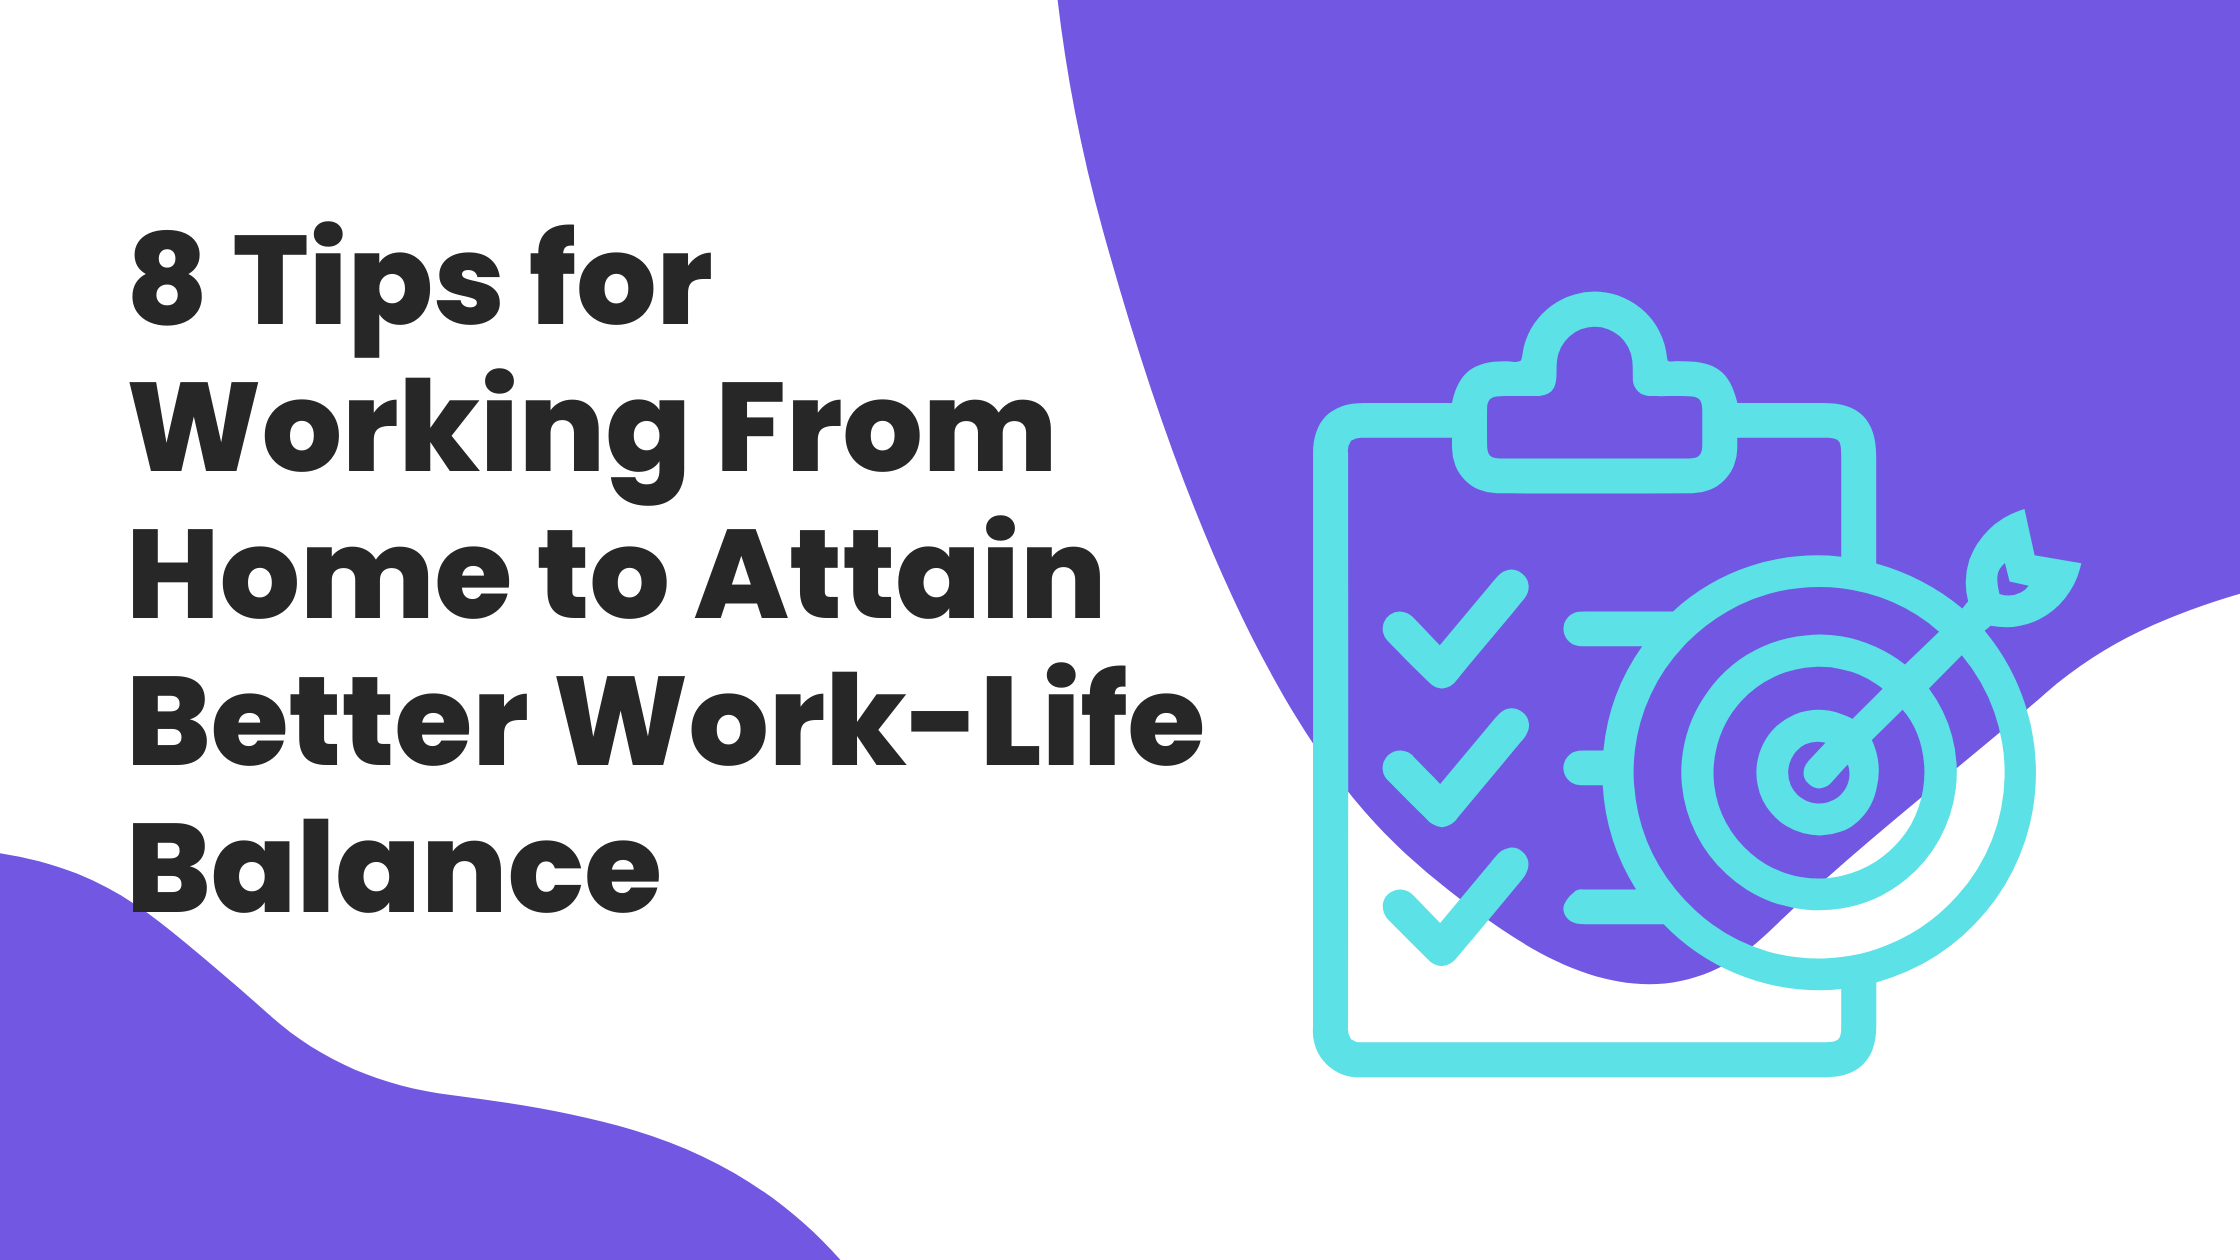 8 Tips for Working From Home to Attain Better Work-Life Balance